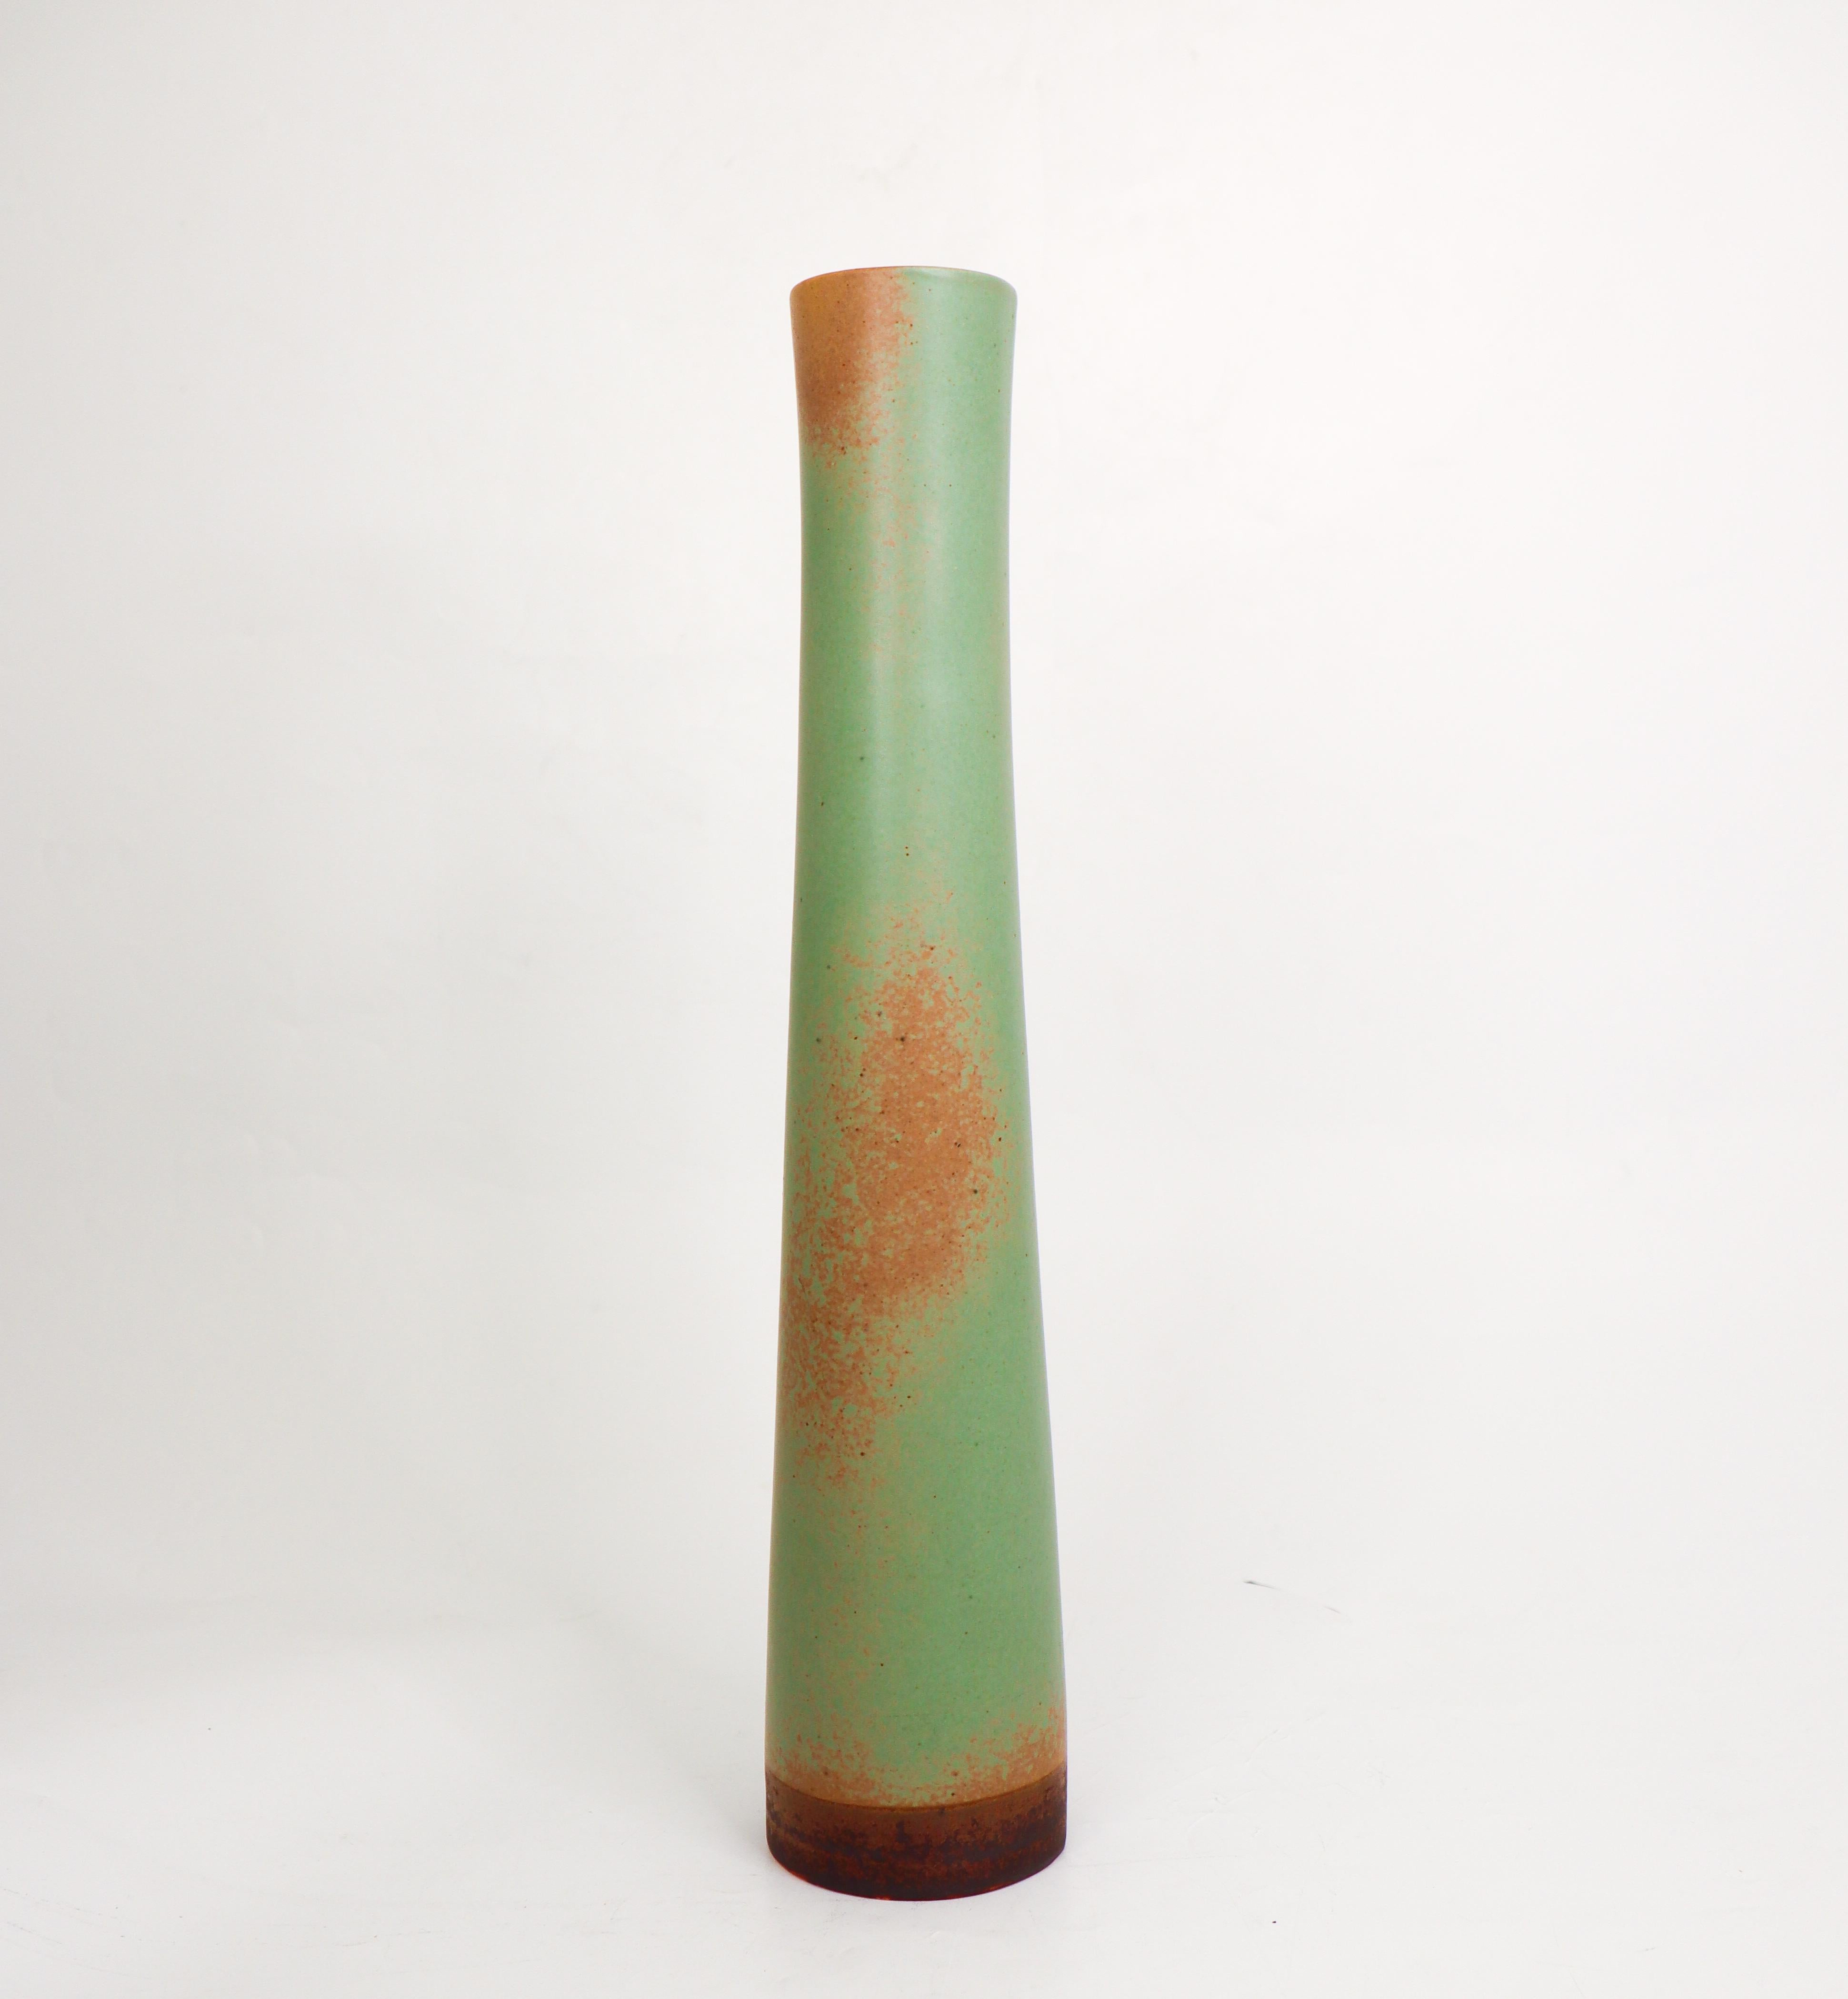 A stunning cylindric vase designed by Annikki Hovisaari at Arabia in Finland in the Mid 20th century. The vase has a stunning matte green glaze, it is 36 cm (14,4